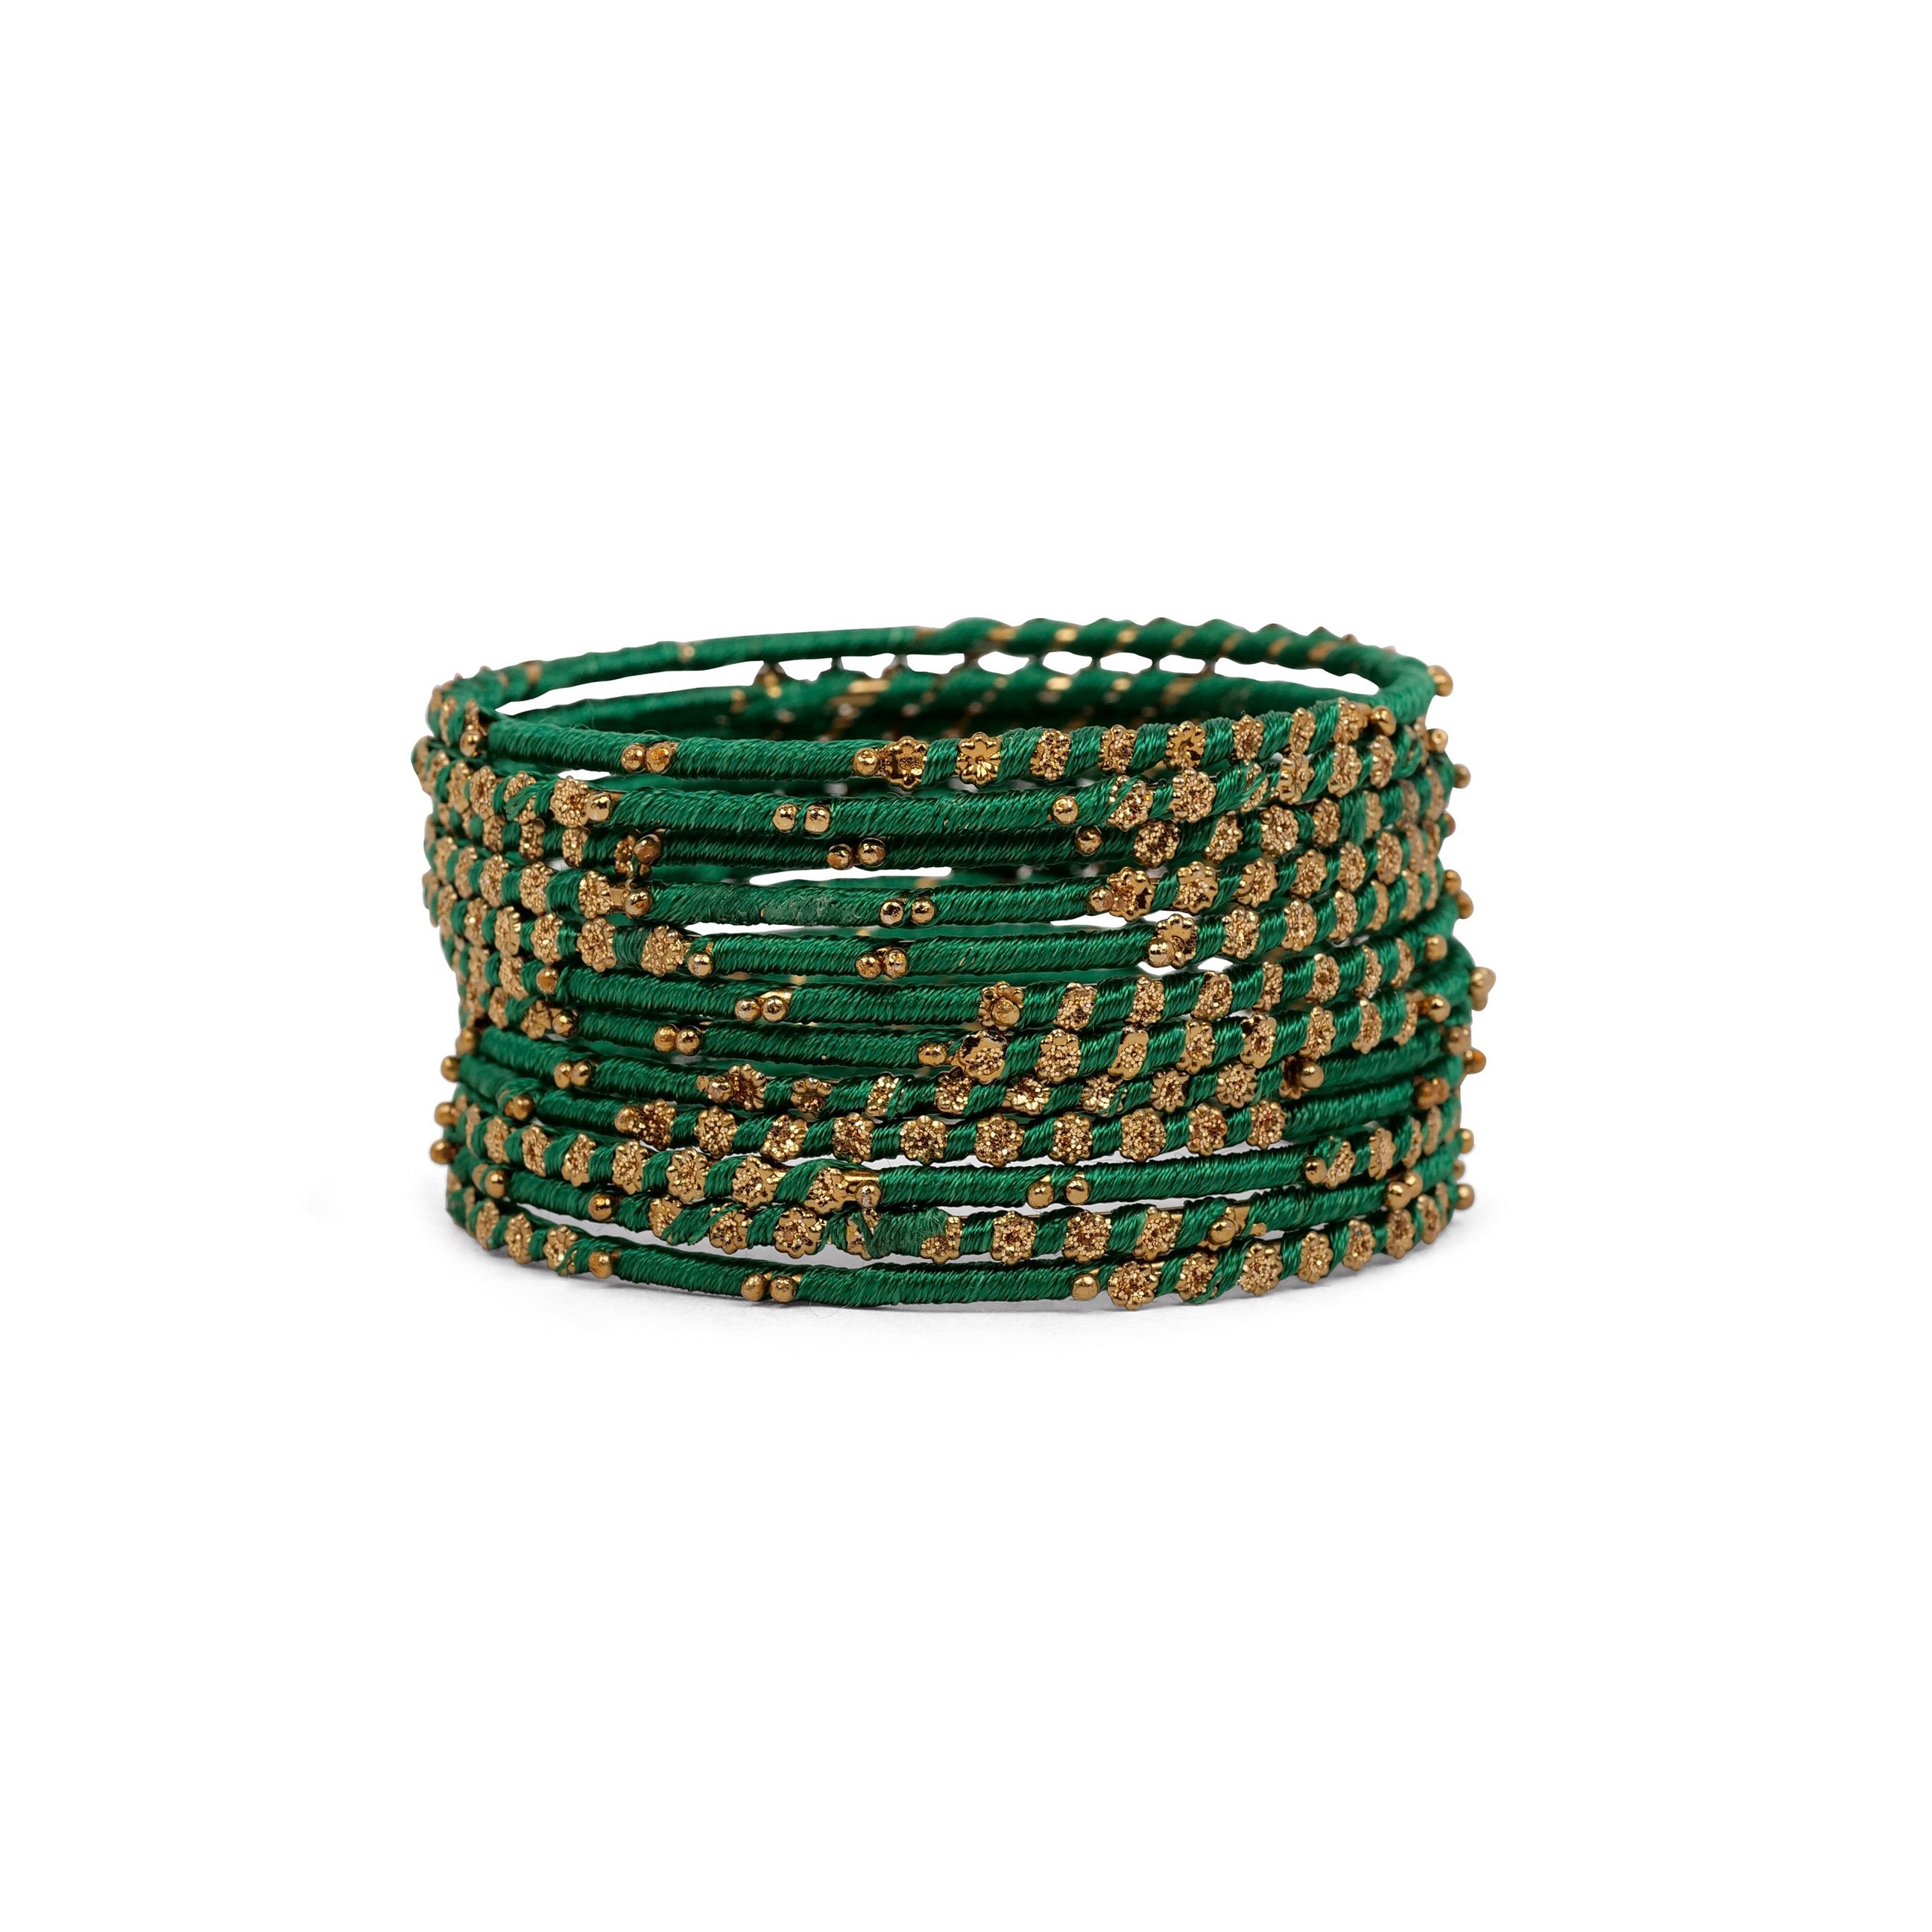 Set of 12 Floral Thead Bangles in Green